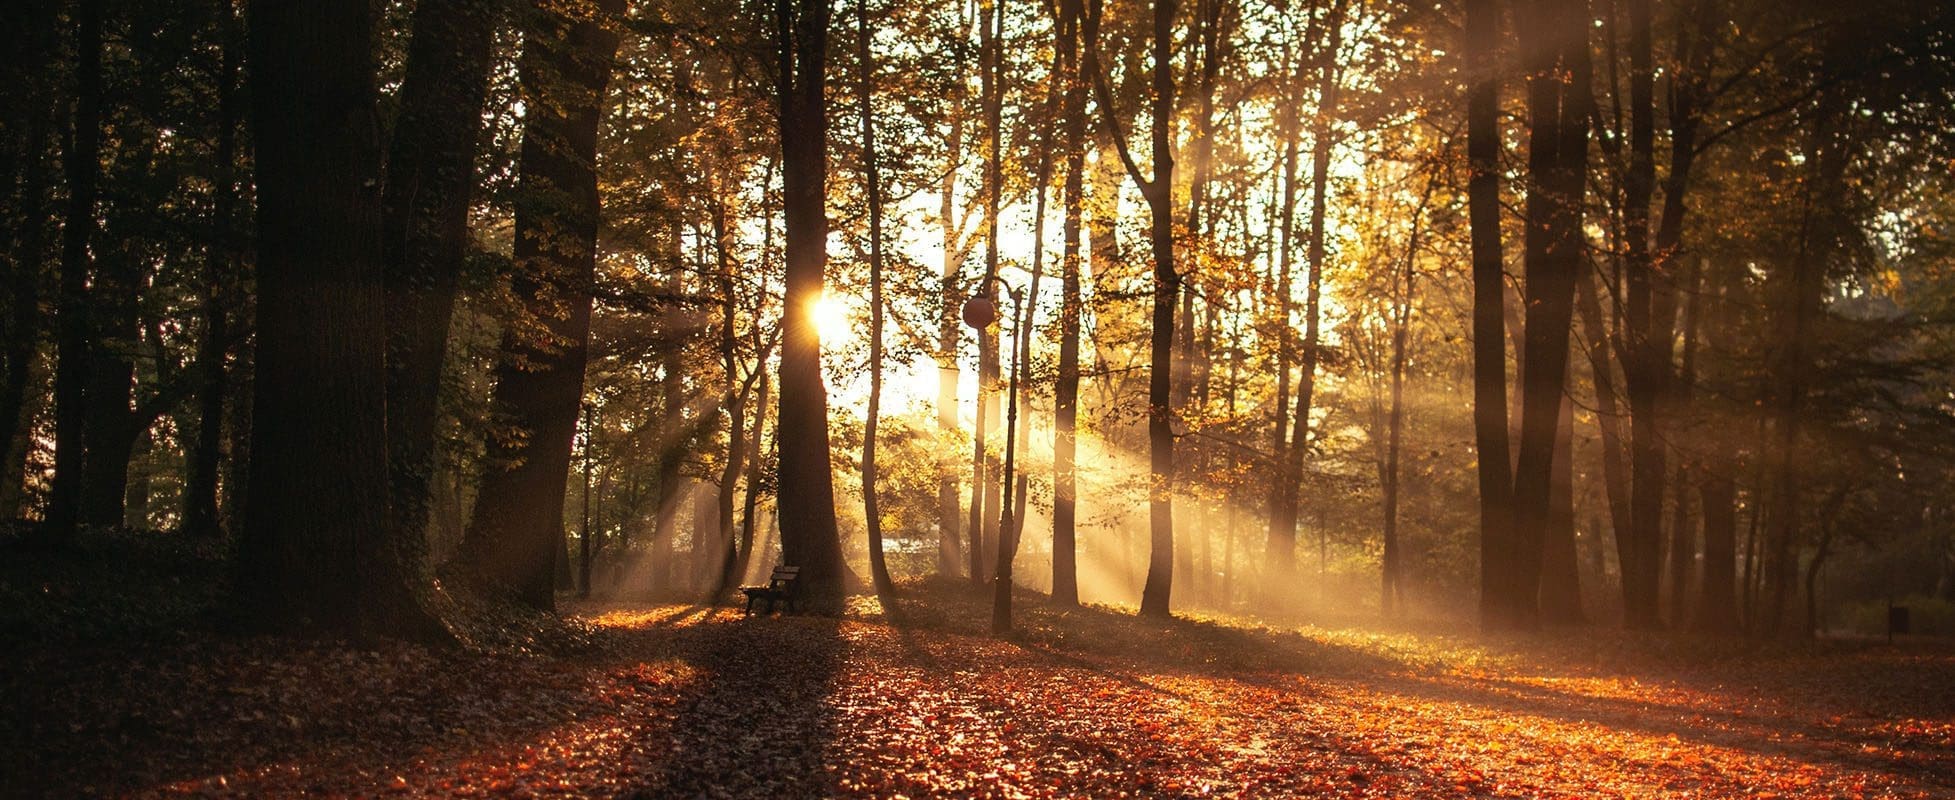 fall leaves on the ground with a beam of sunlight coming through trees